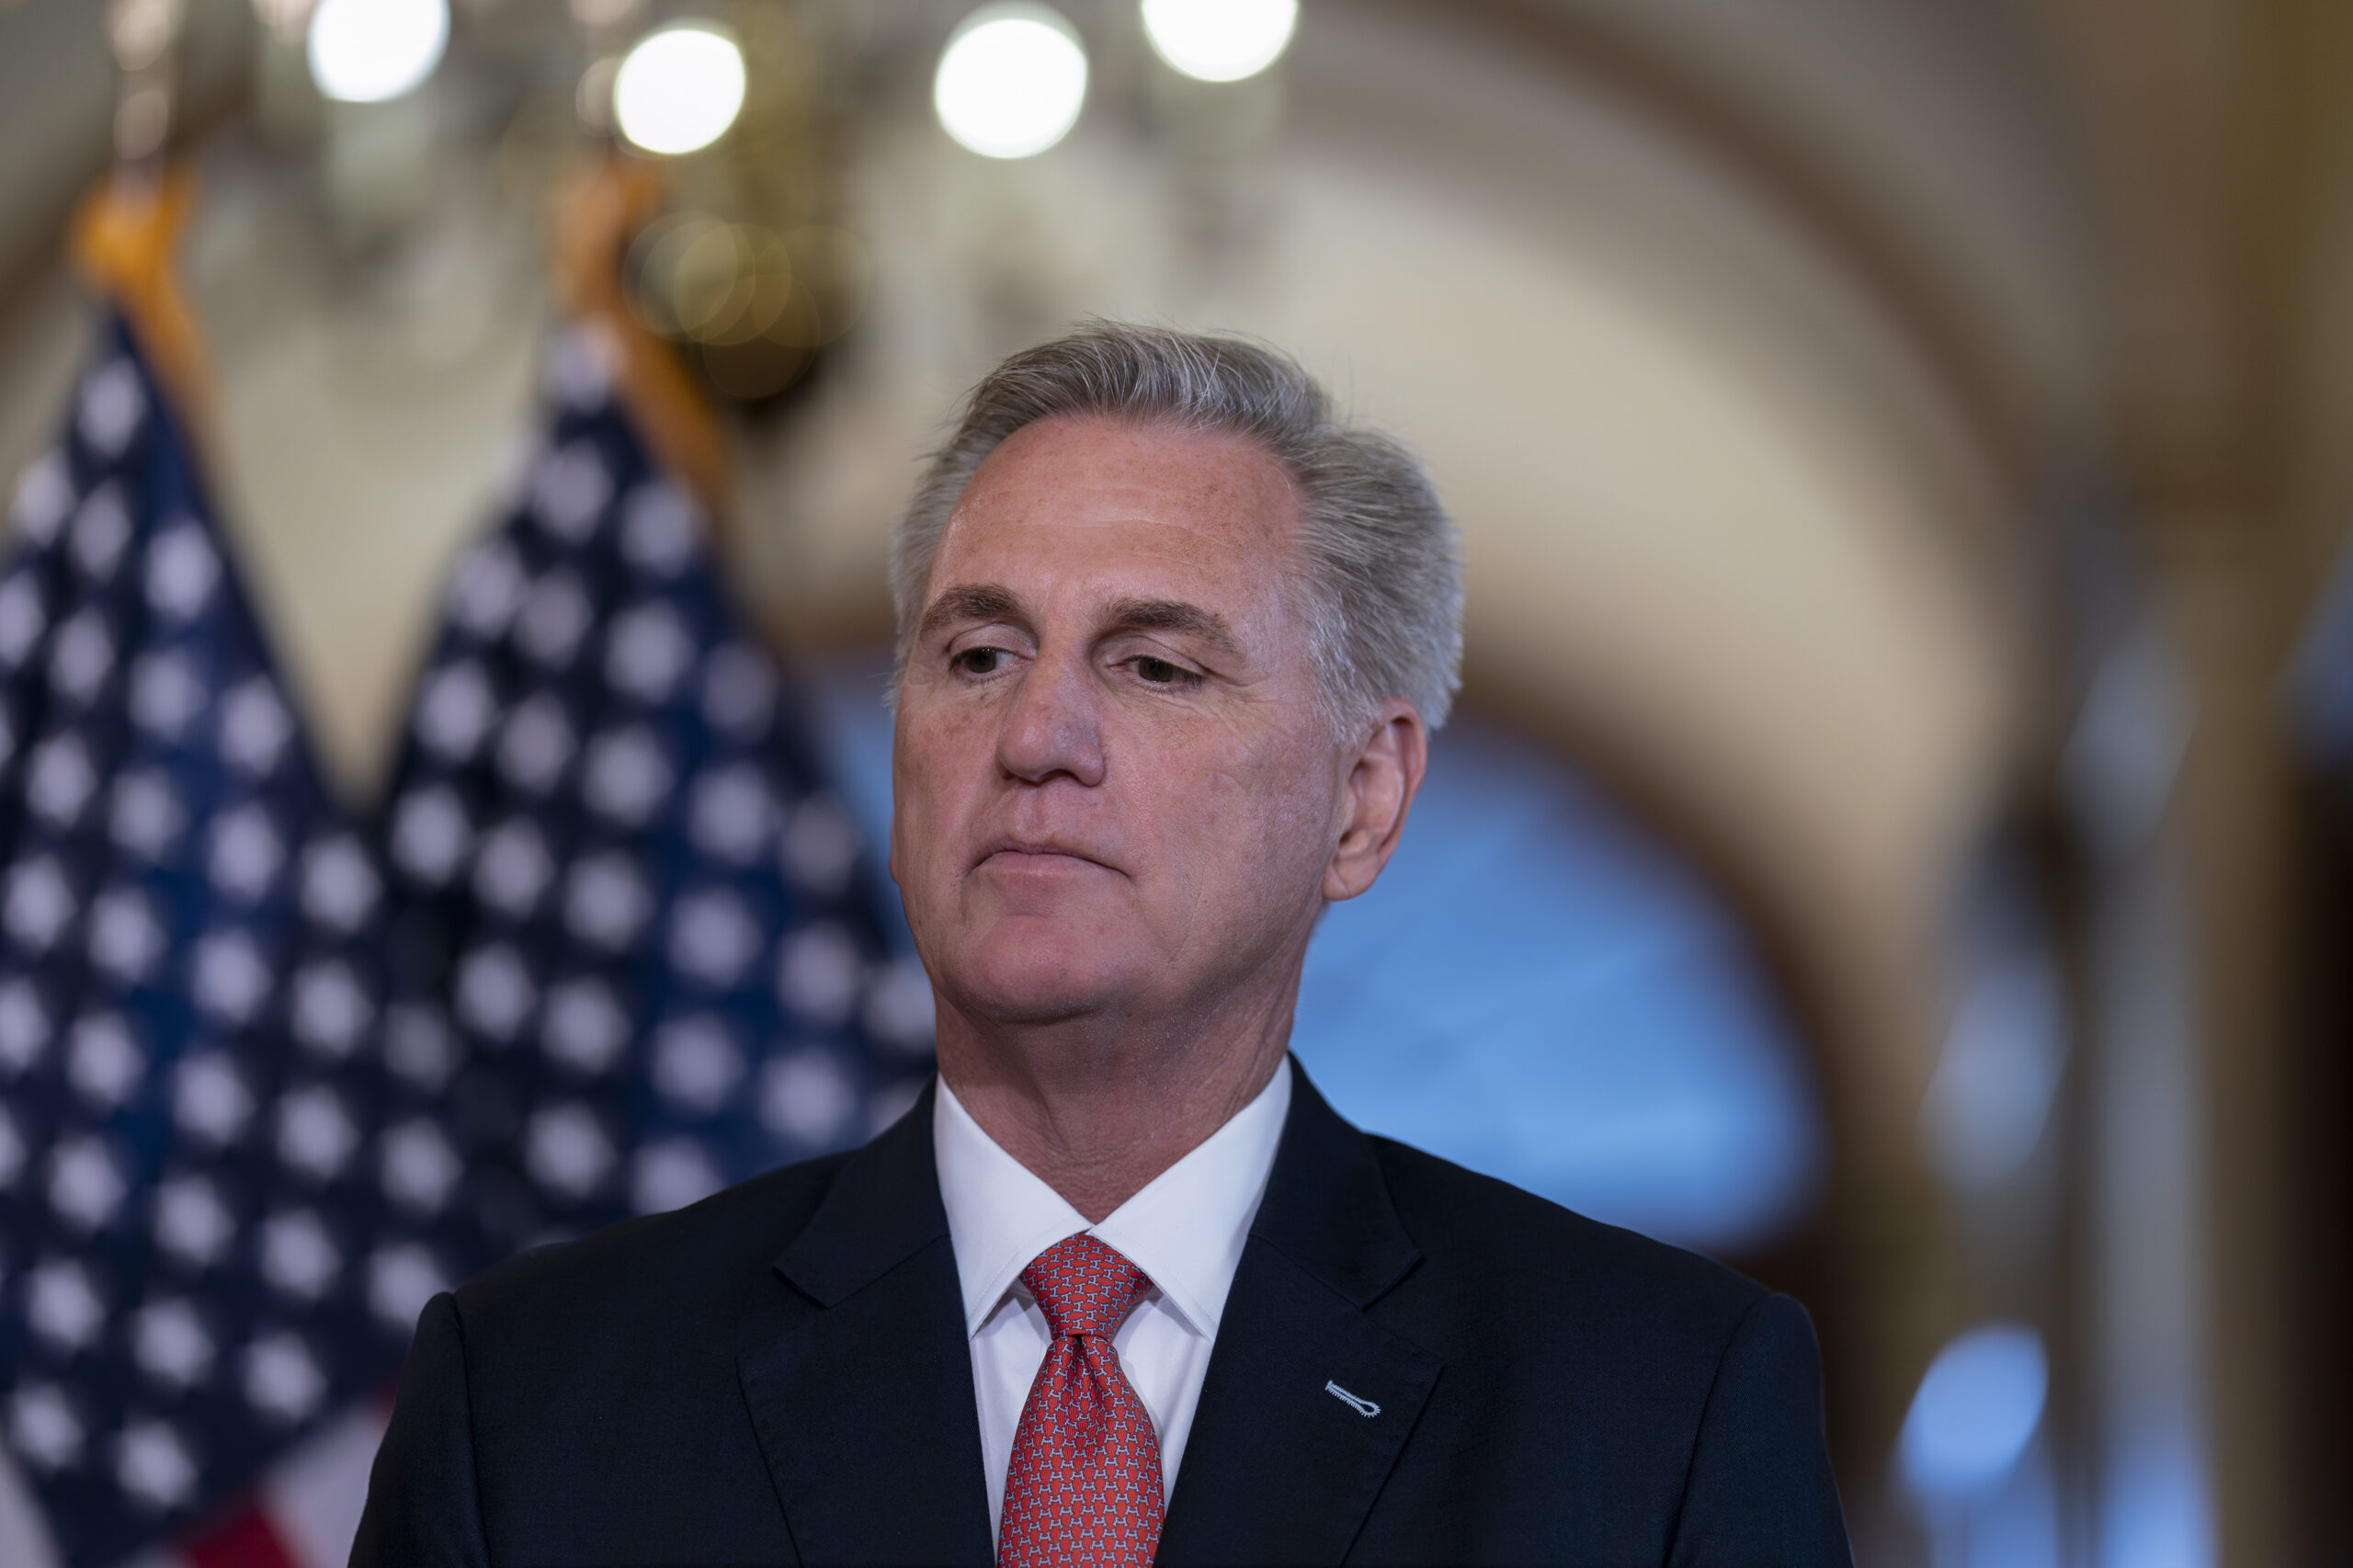 Speaker of the House Kevin McCarthy, R-Calif., pauses during an event with Italian Prime Minister Giorgia Meloni, at the Capitol in Washington, Thursday, July 27, 2023. McCarthy is wrapping up work in the House as Congress leaves for the annual August recess.